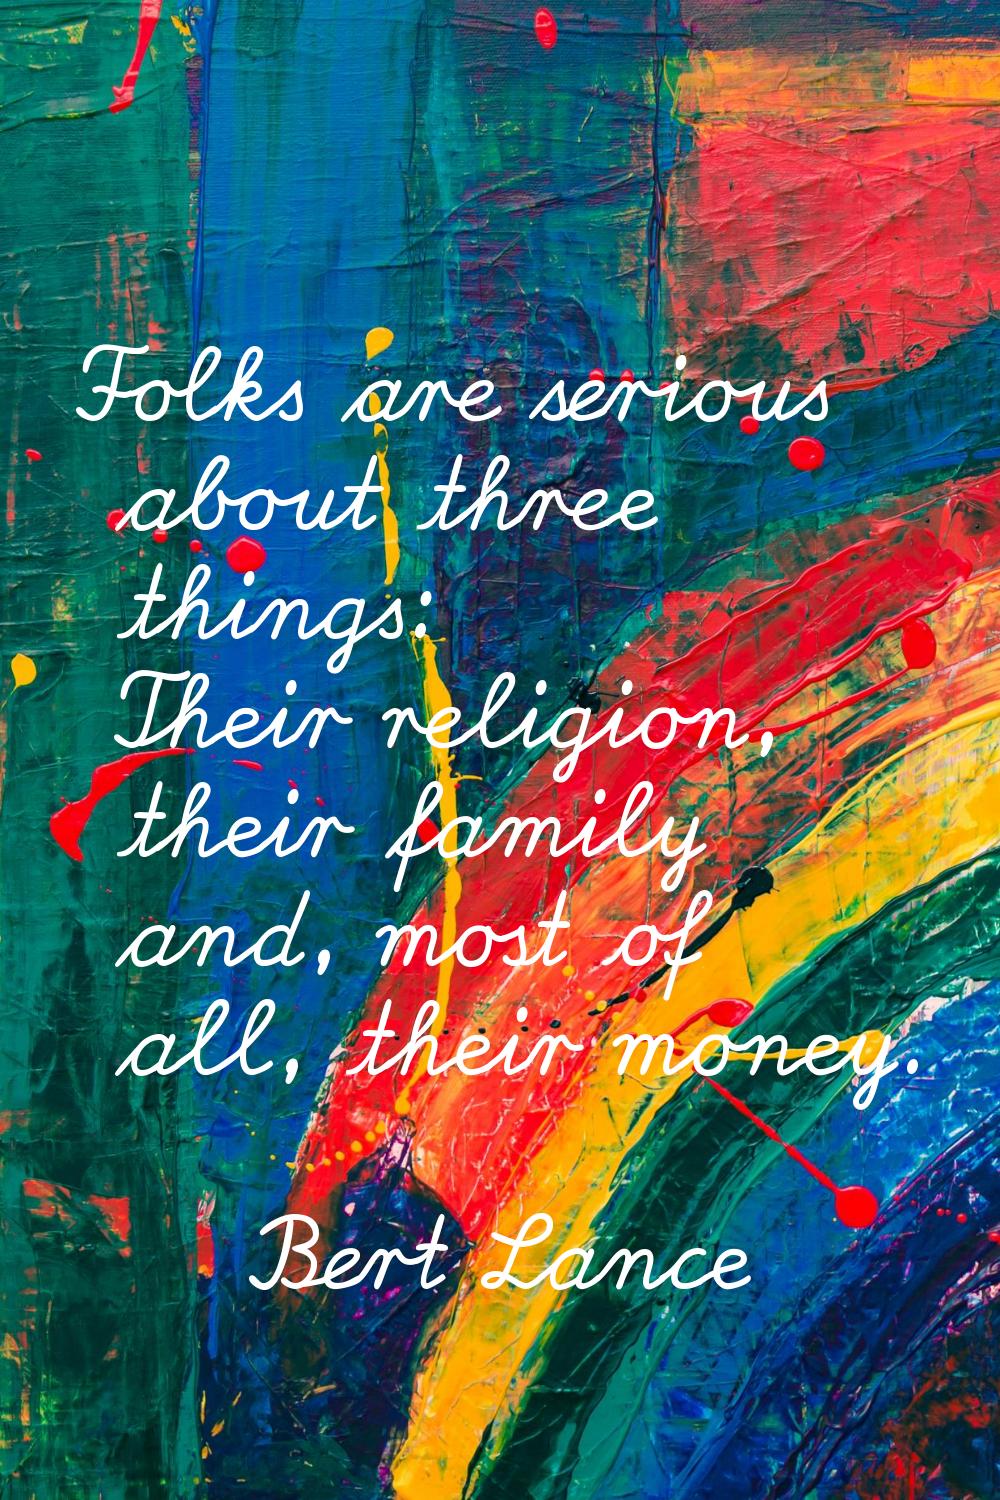 Folks are serious about three things: Their religion, their family and, most of all, their money.